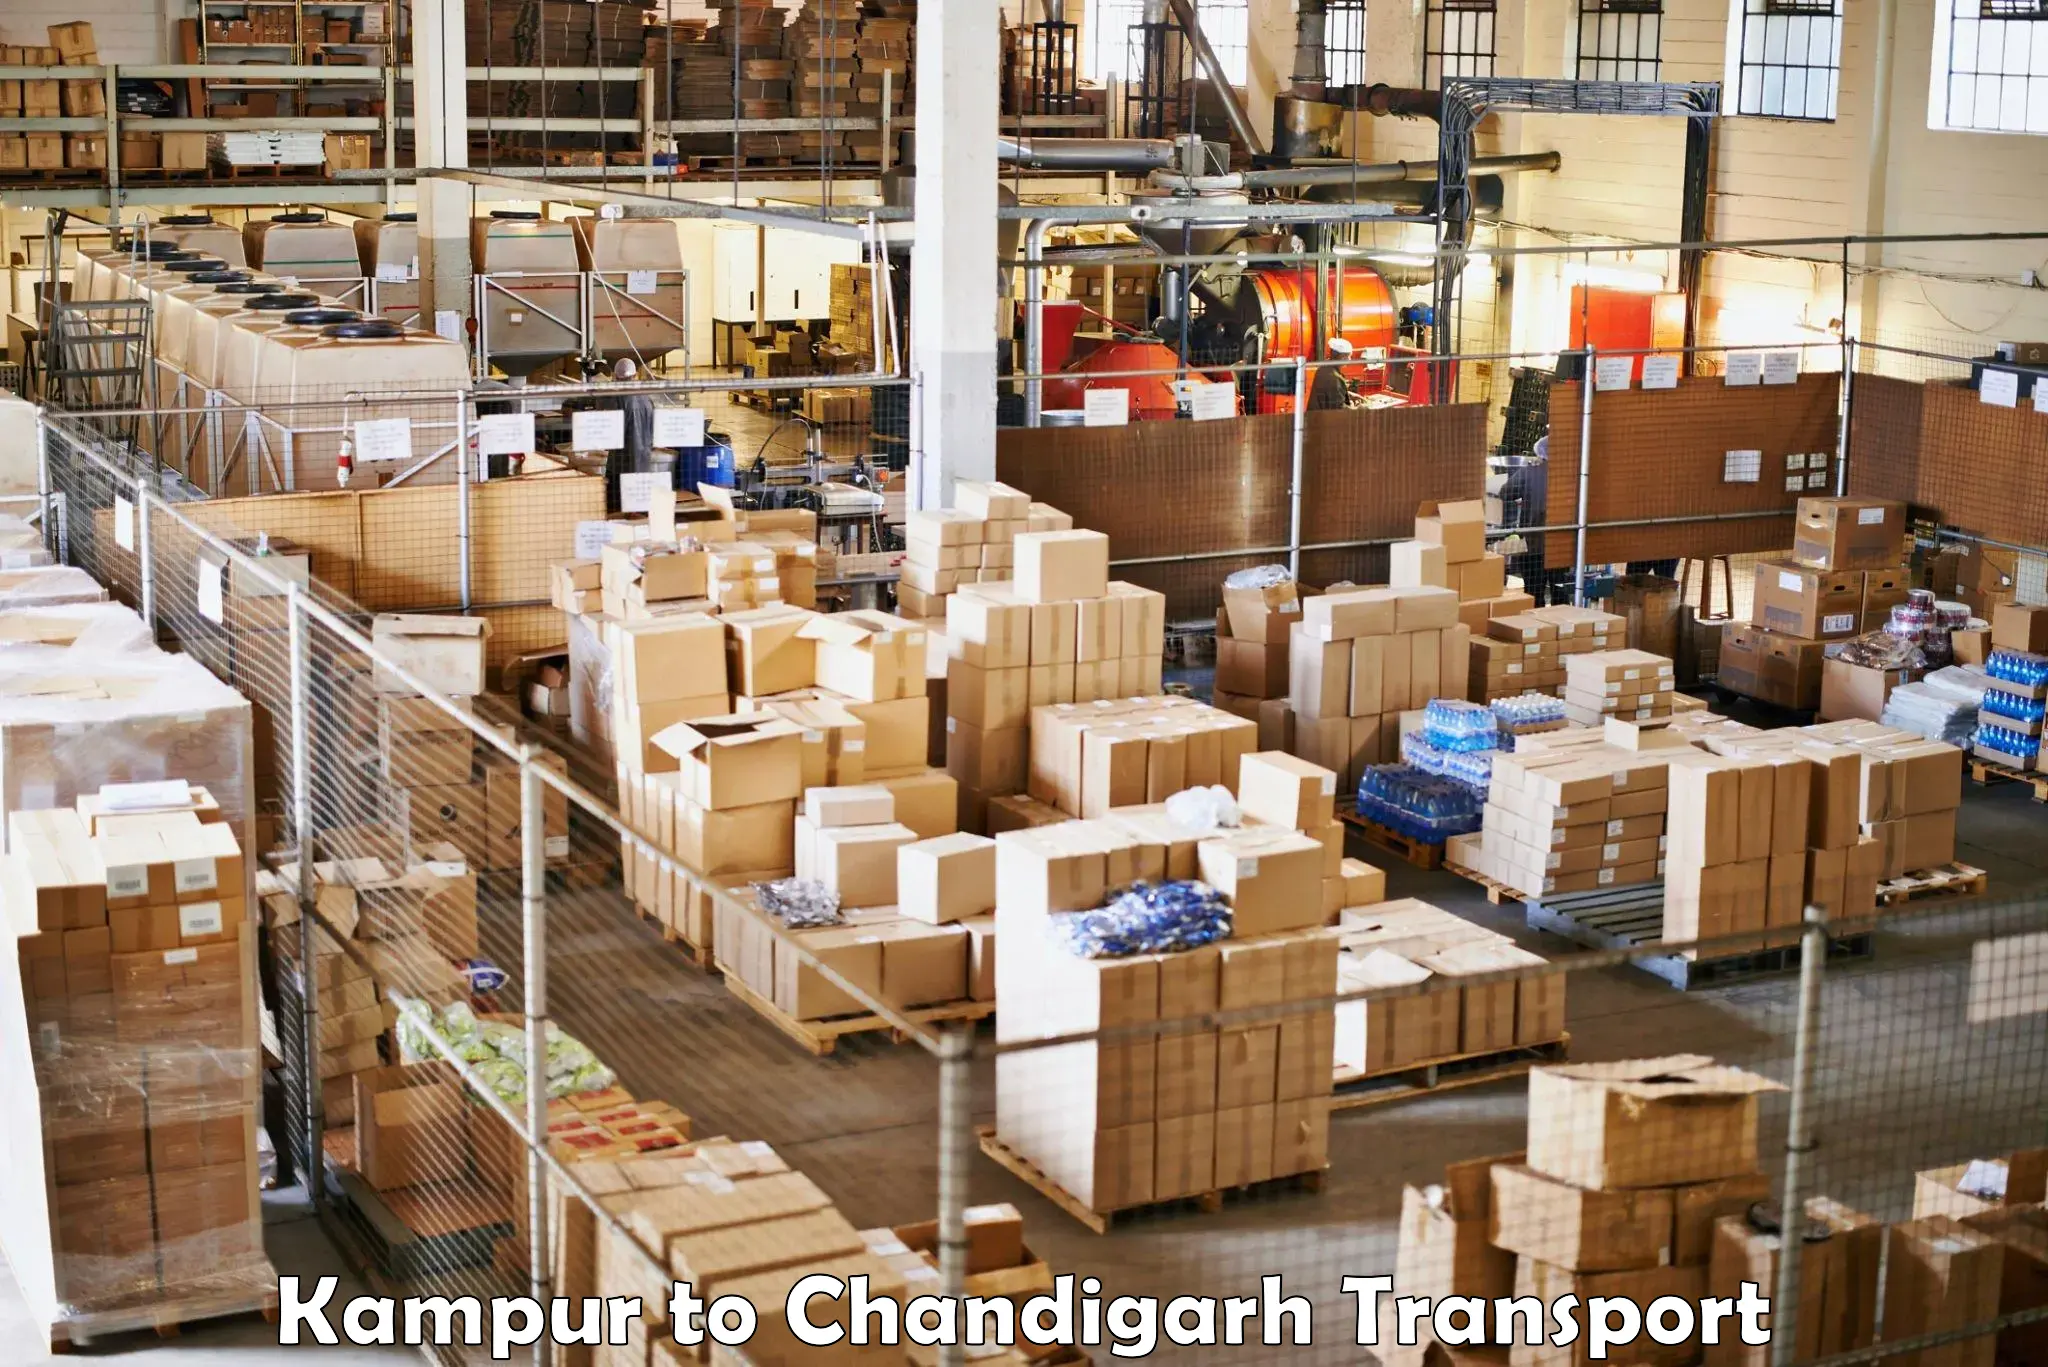 Part load transport service in India Kampur to Chandigarh